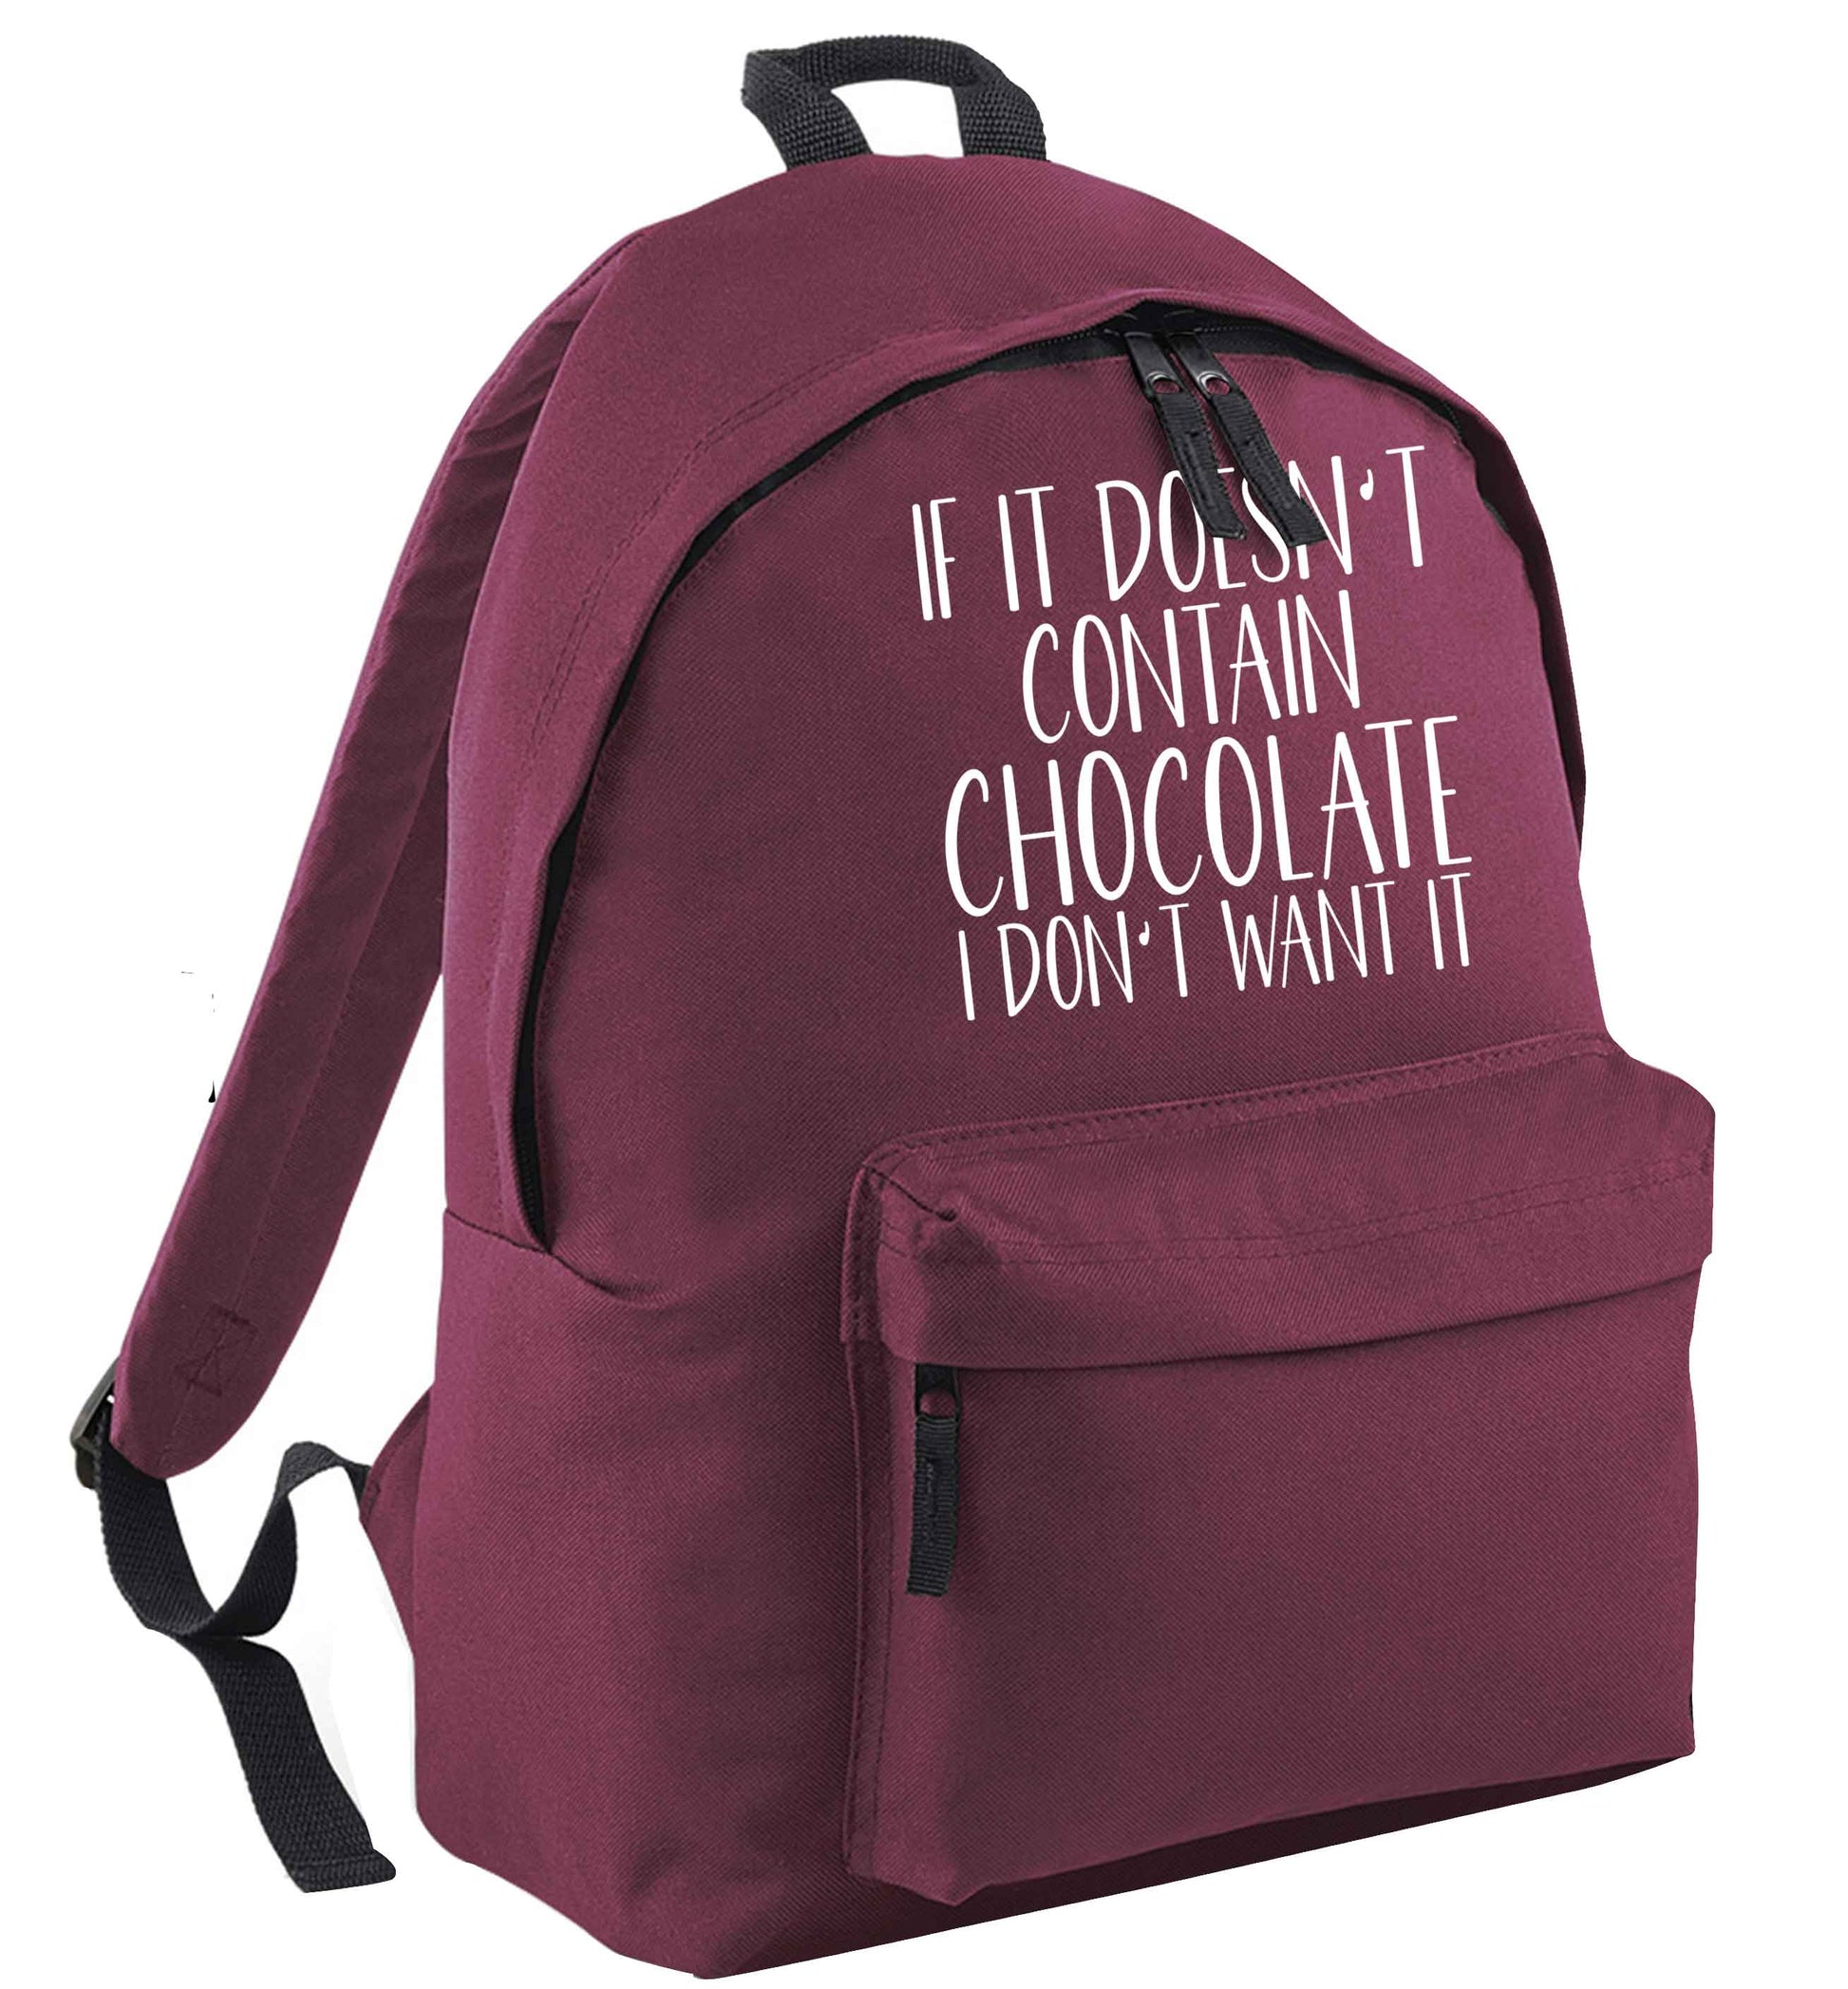 If it doesn't contain chocolate I don't want it maroon adults backpack